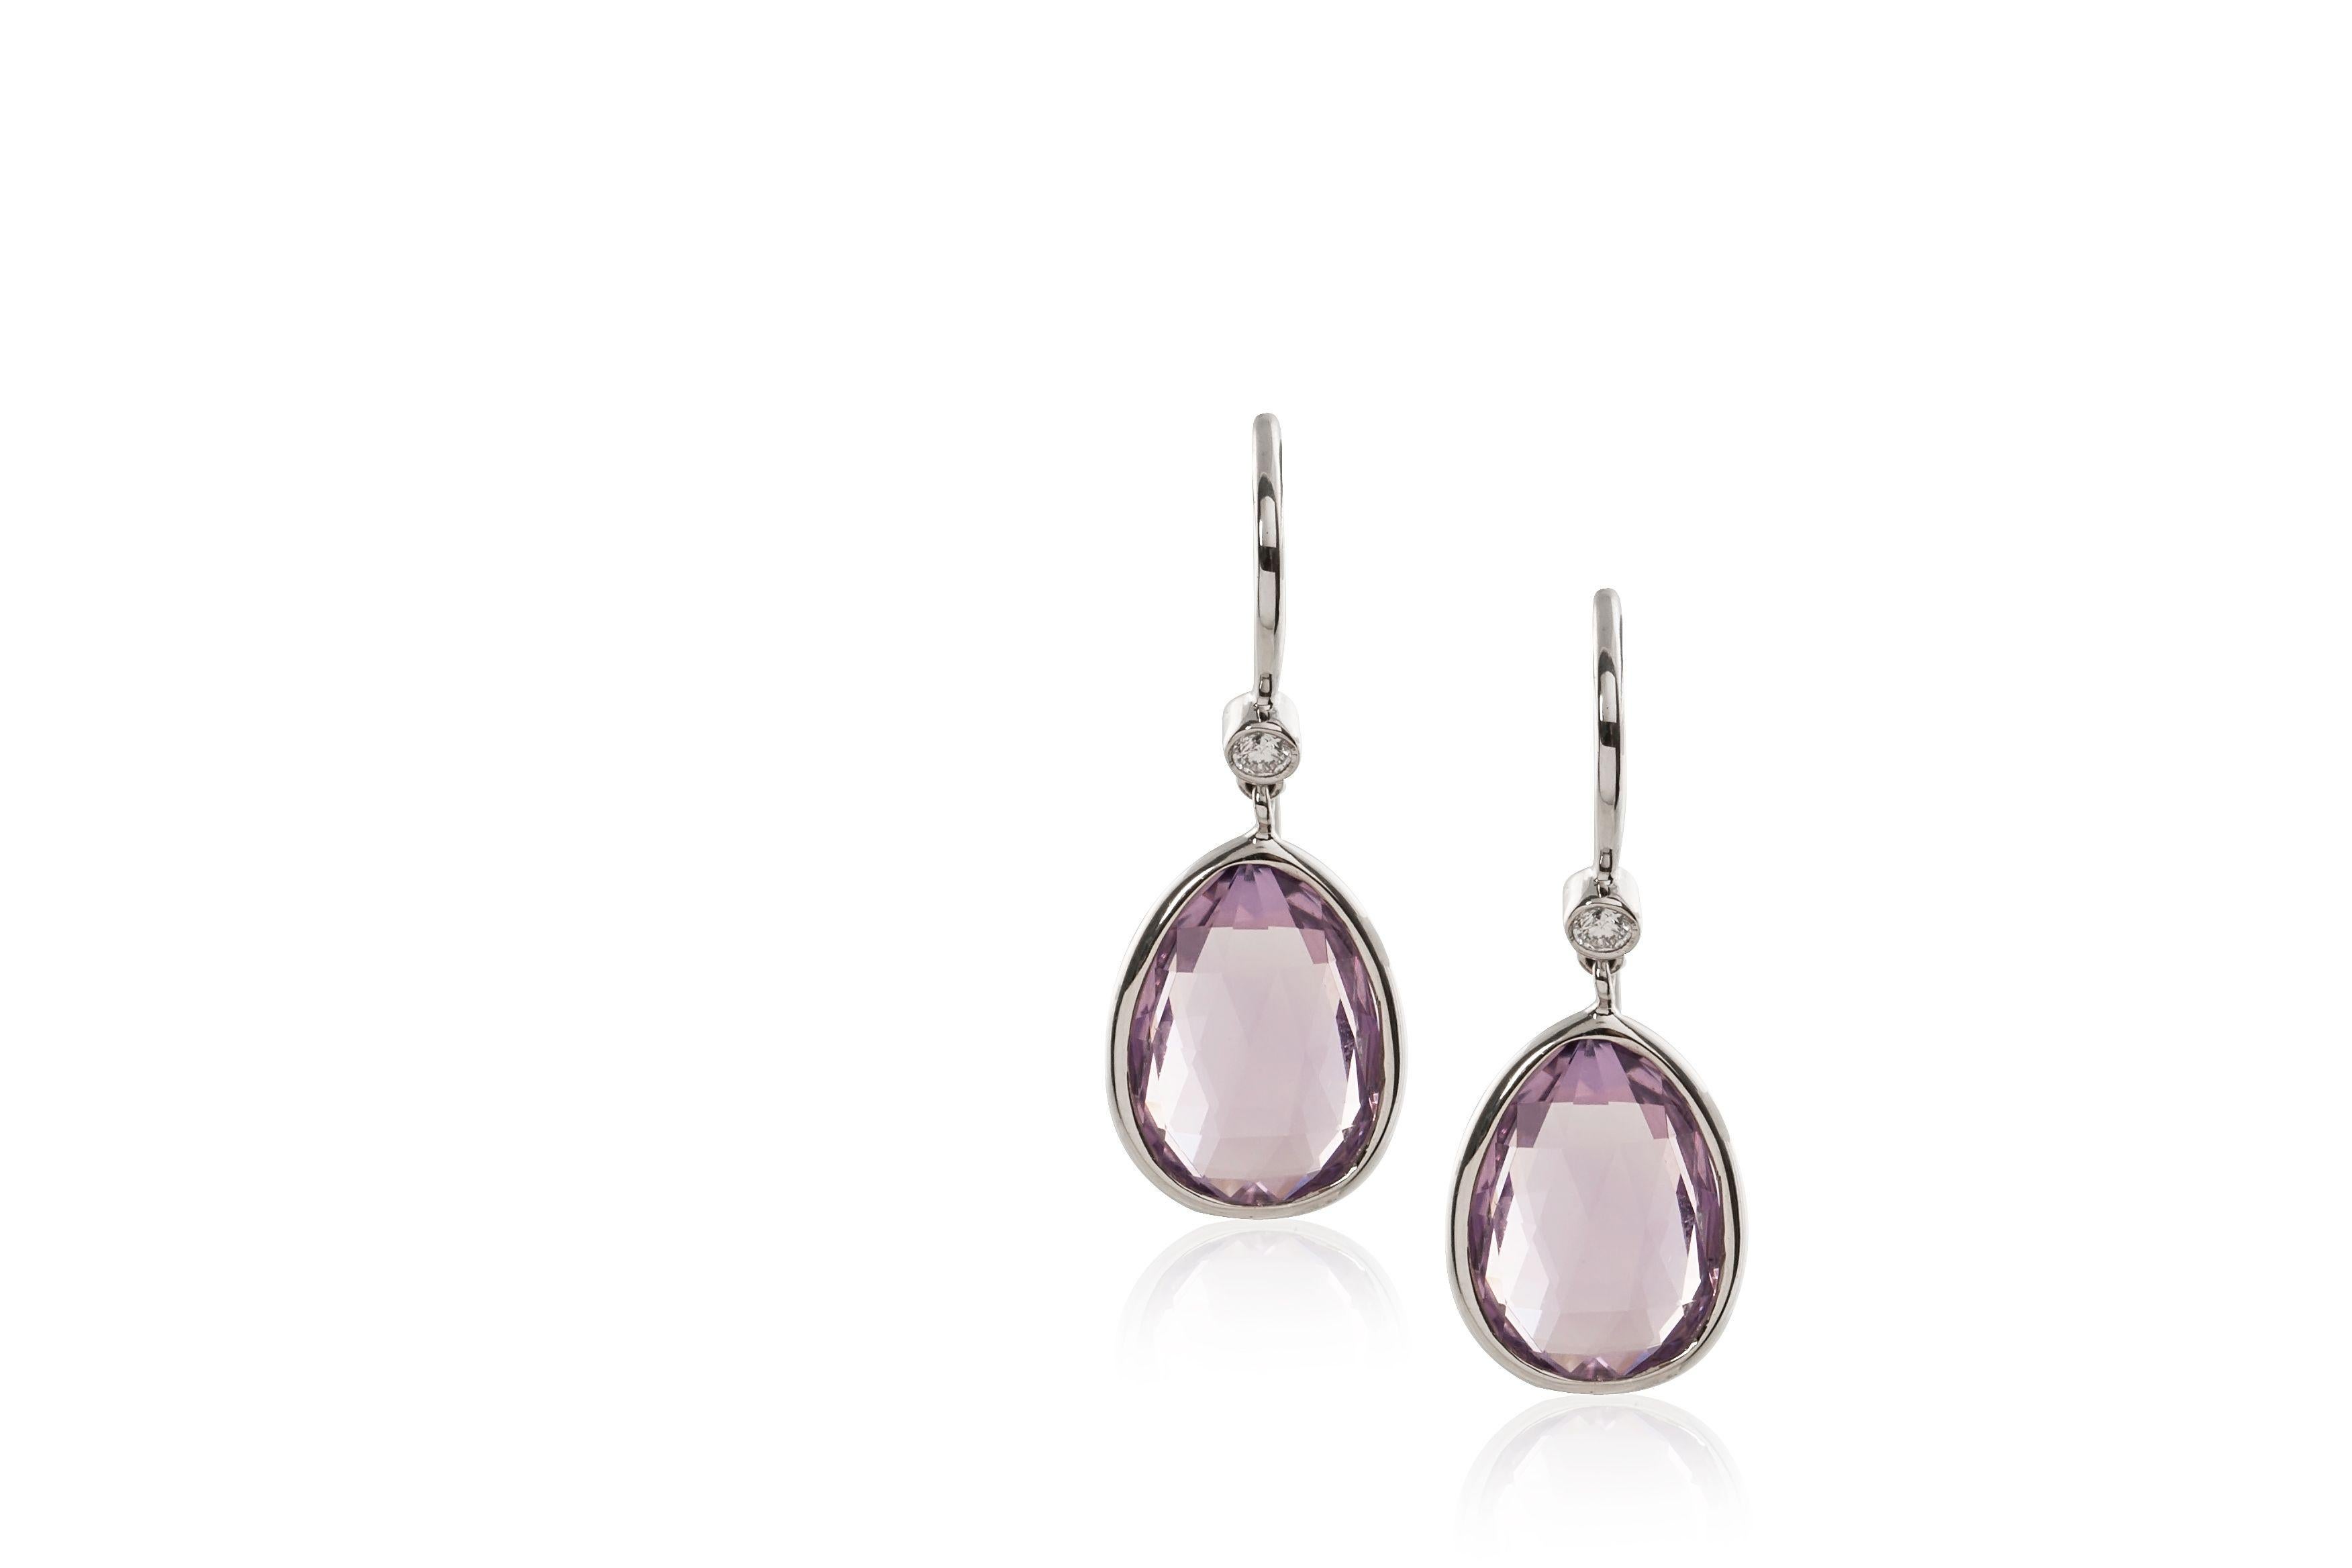 Lavender Amethyst Pear Shape Briolette with Diamond Earrings in 18K White Gold, from 'Gossip' Collection

Stone size: 14 x 20 mm

Gemstone Approx Wt: Lavender Amethyst - 28.60 Carats

Diamonds: G-H / VS, Approx Wt 0.14 Carats